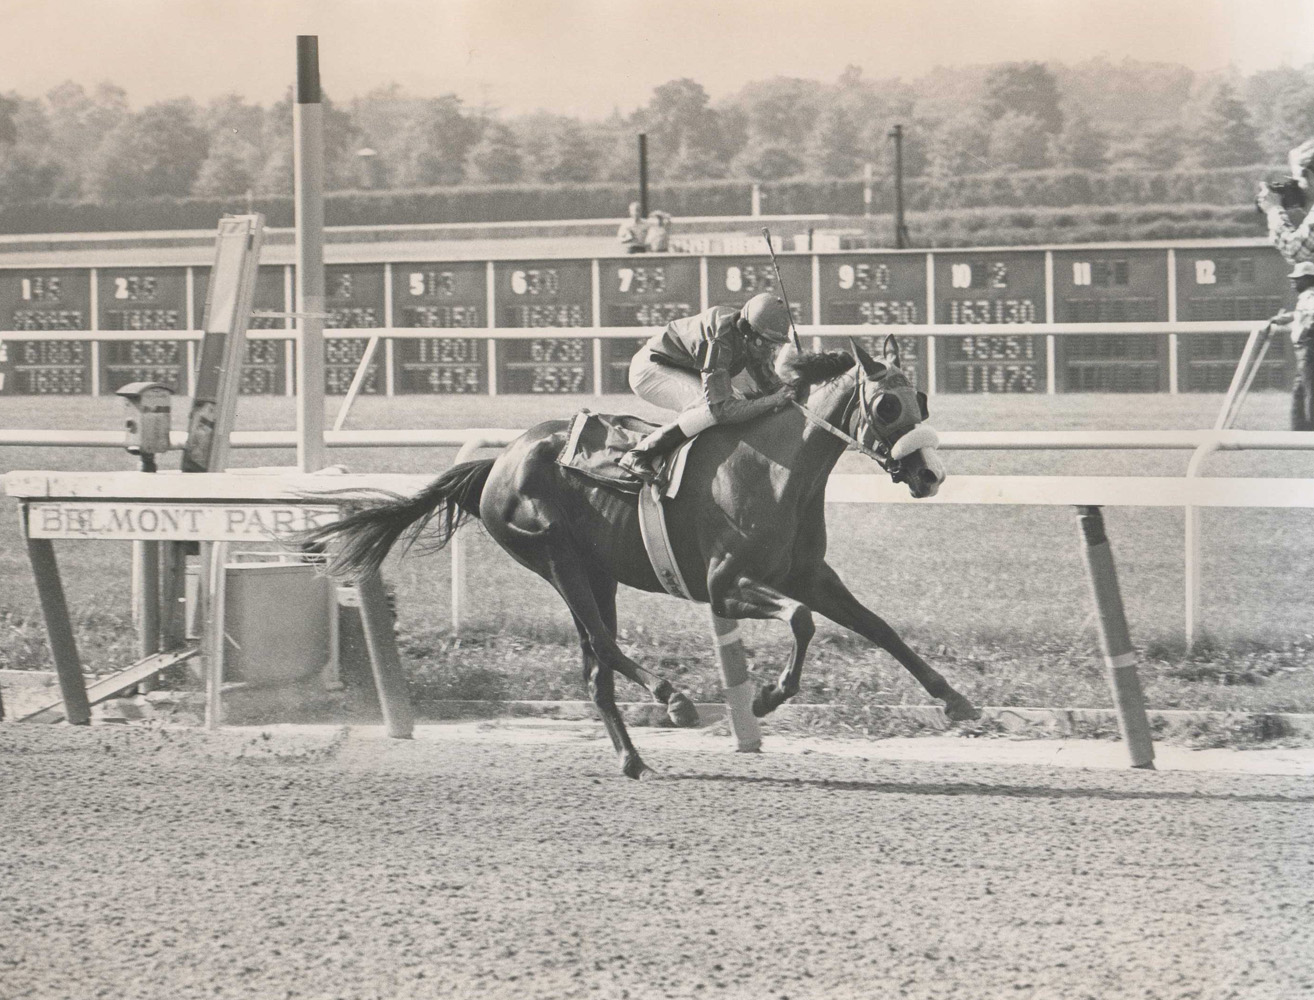 Chris Evert (Jorge Velasquez up) winning the 1974 Coaching Club American Oaks at Belmont Park (Ray Woolfe, Jr./Museum Collection)